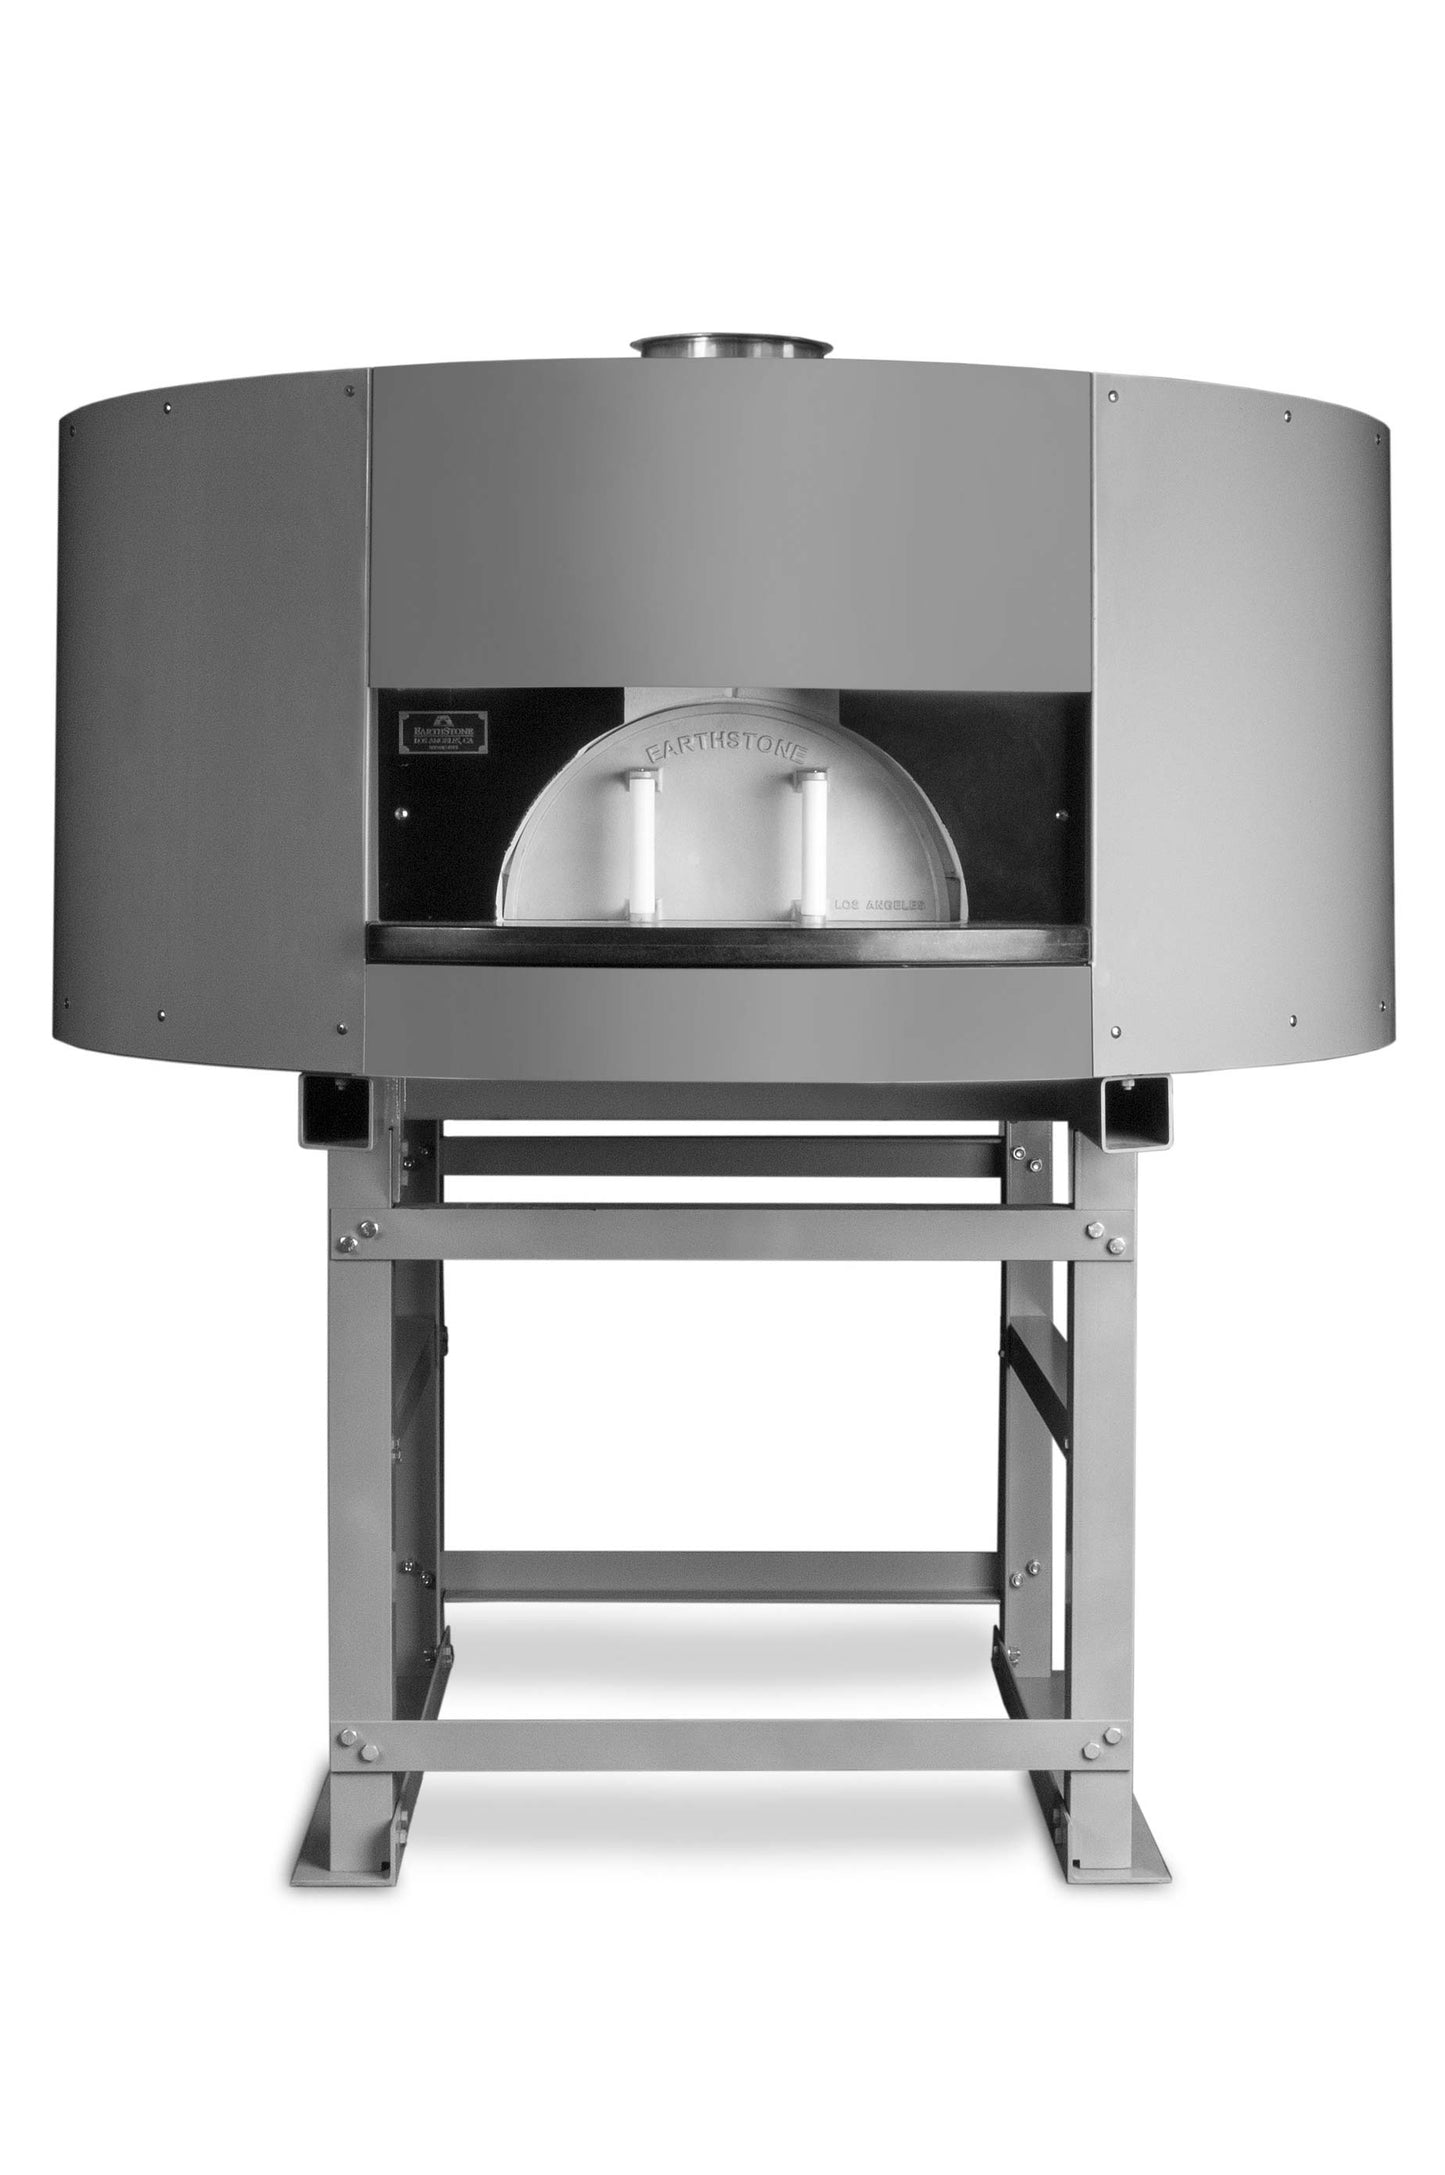 Earthstone 120-PA Wood Fired Terra Pietra Series Naples Style Oven